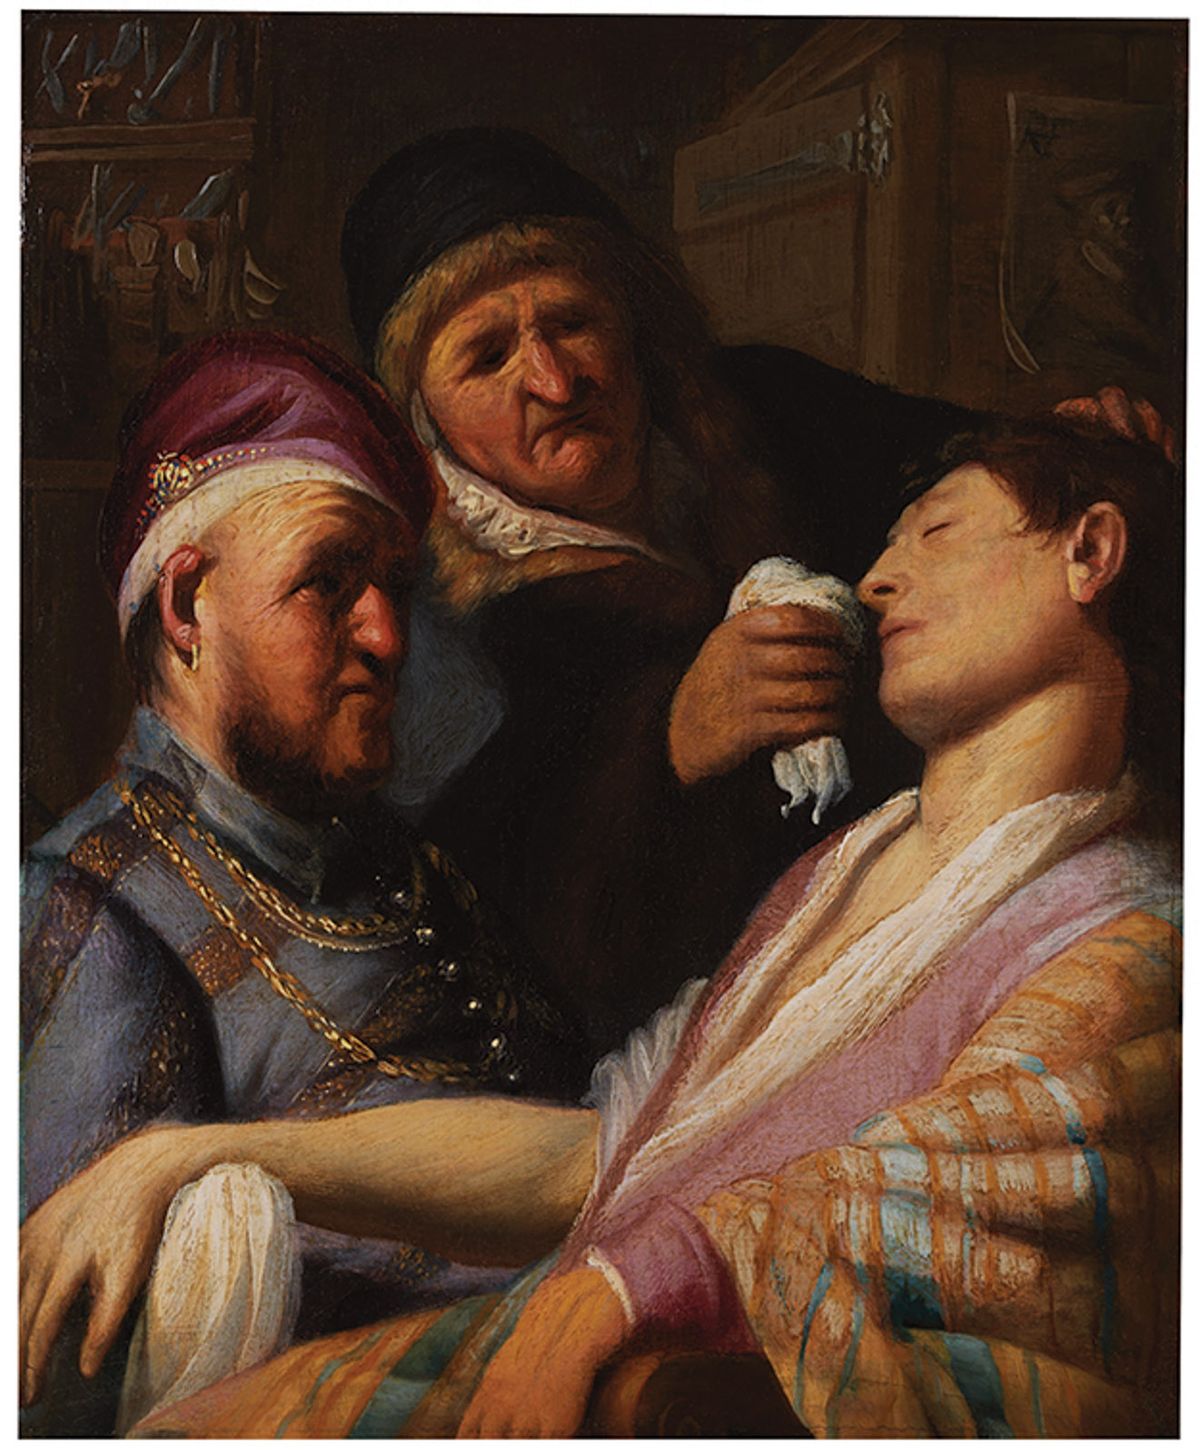 Rembrandt's Unconscious Patient (Allegory of Smell) van Rijn (around 1624–25) belonged to Jay Rappoport's grandfather Courtesy of The Leiden Collection